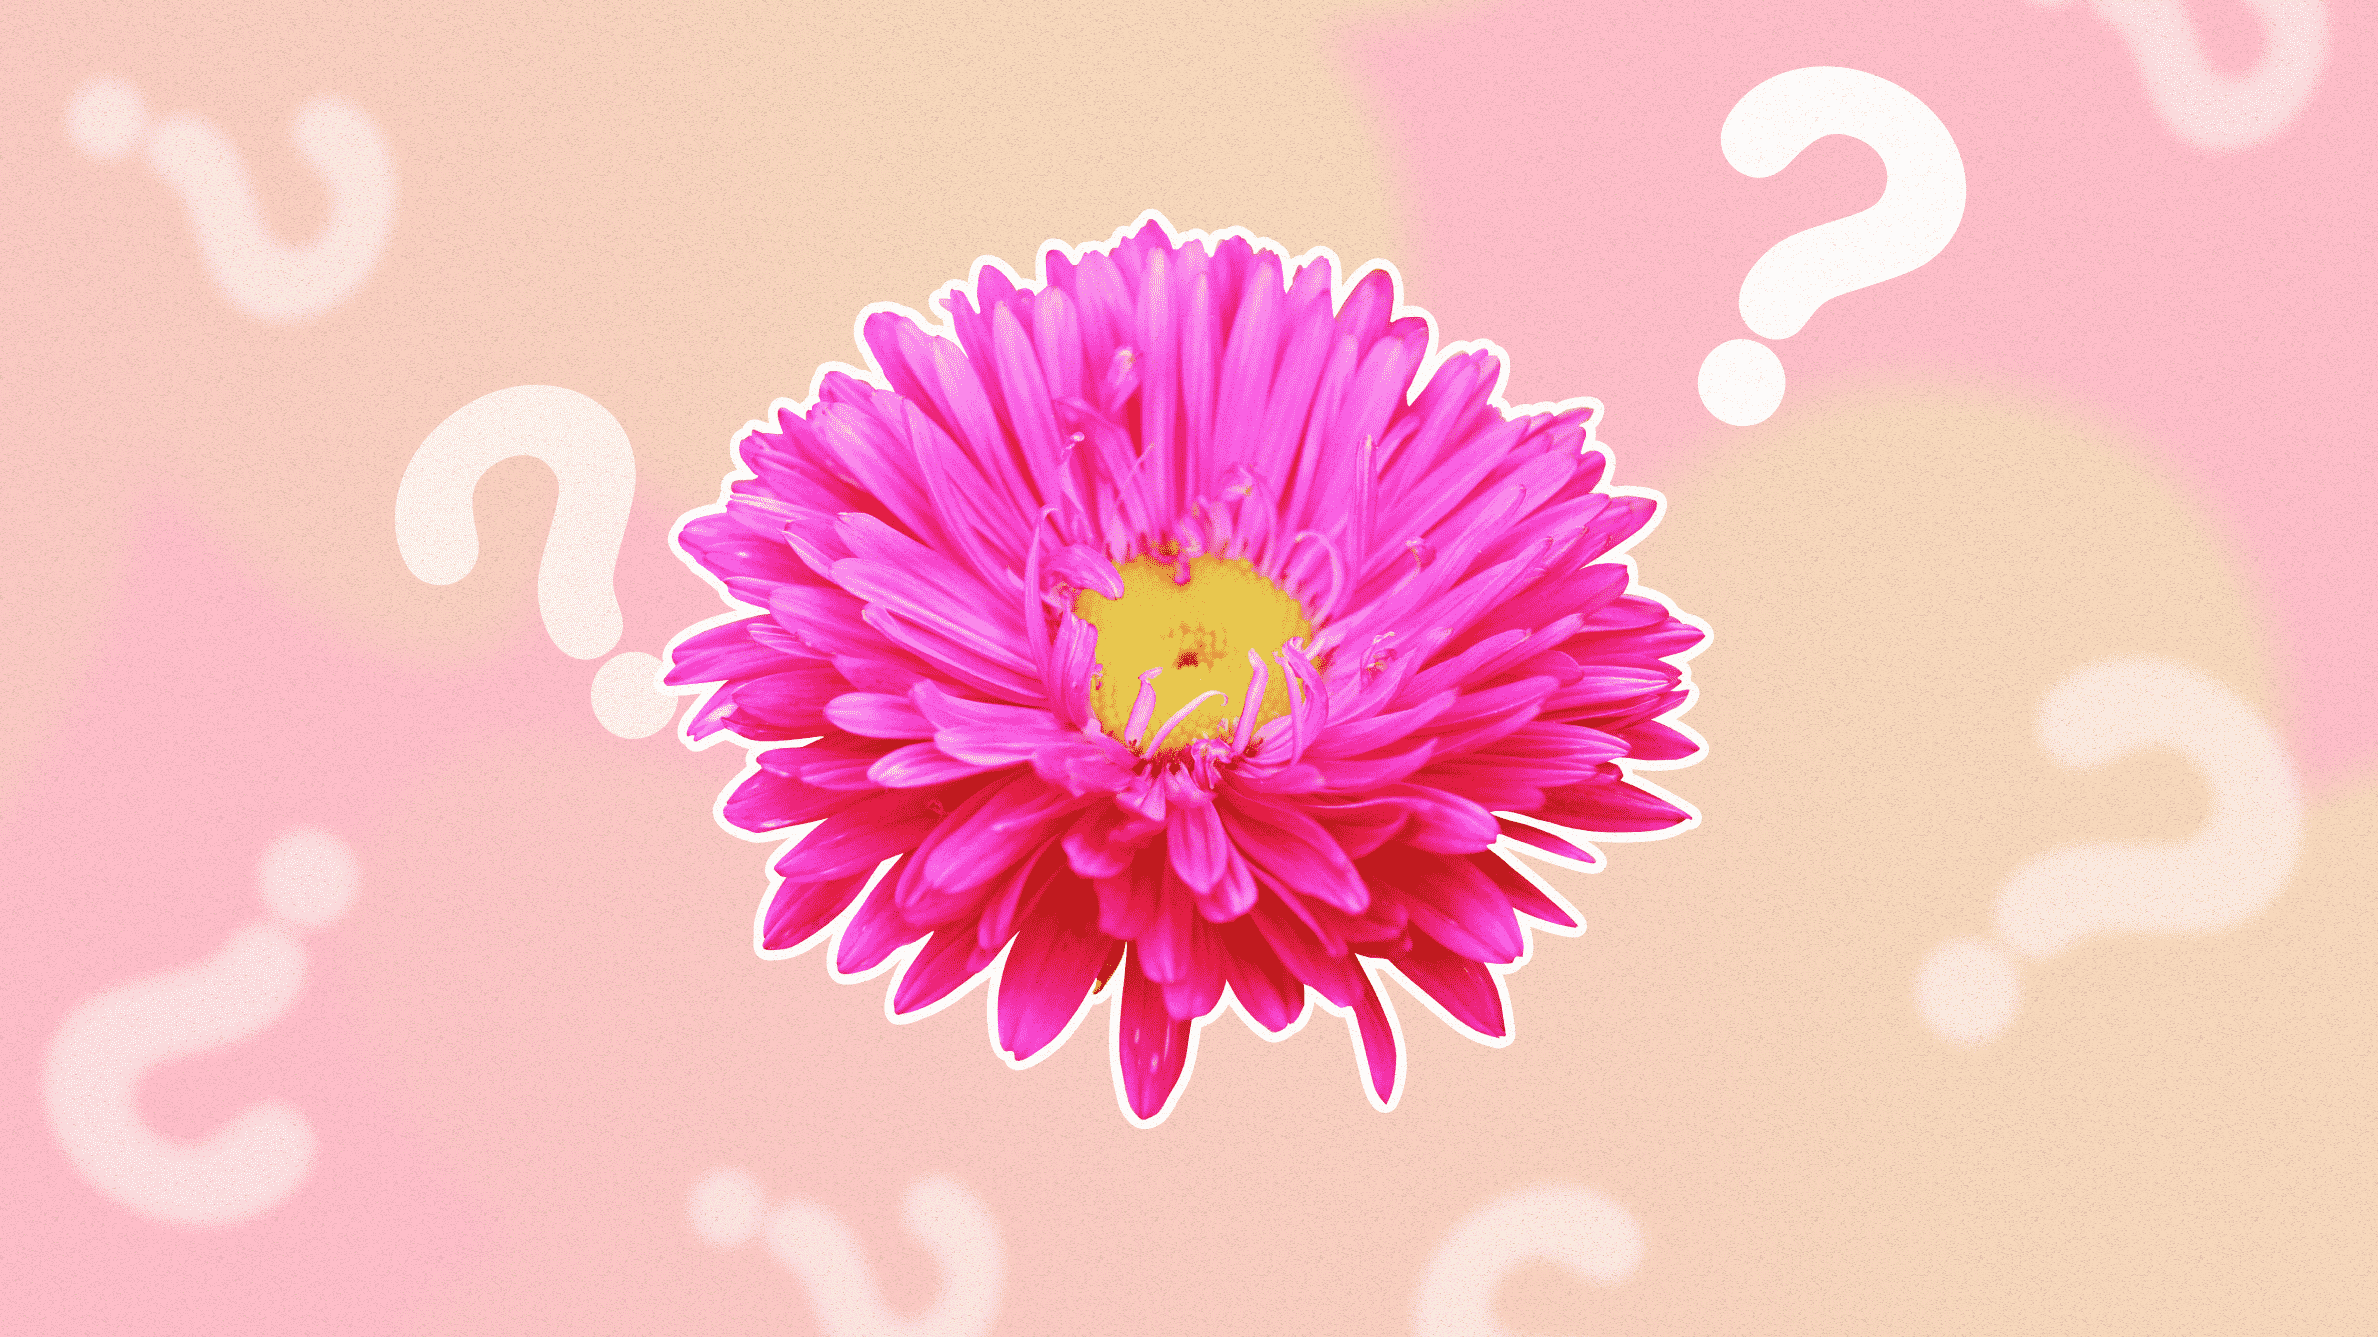 Aster flower meaning